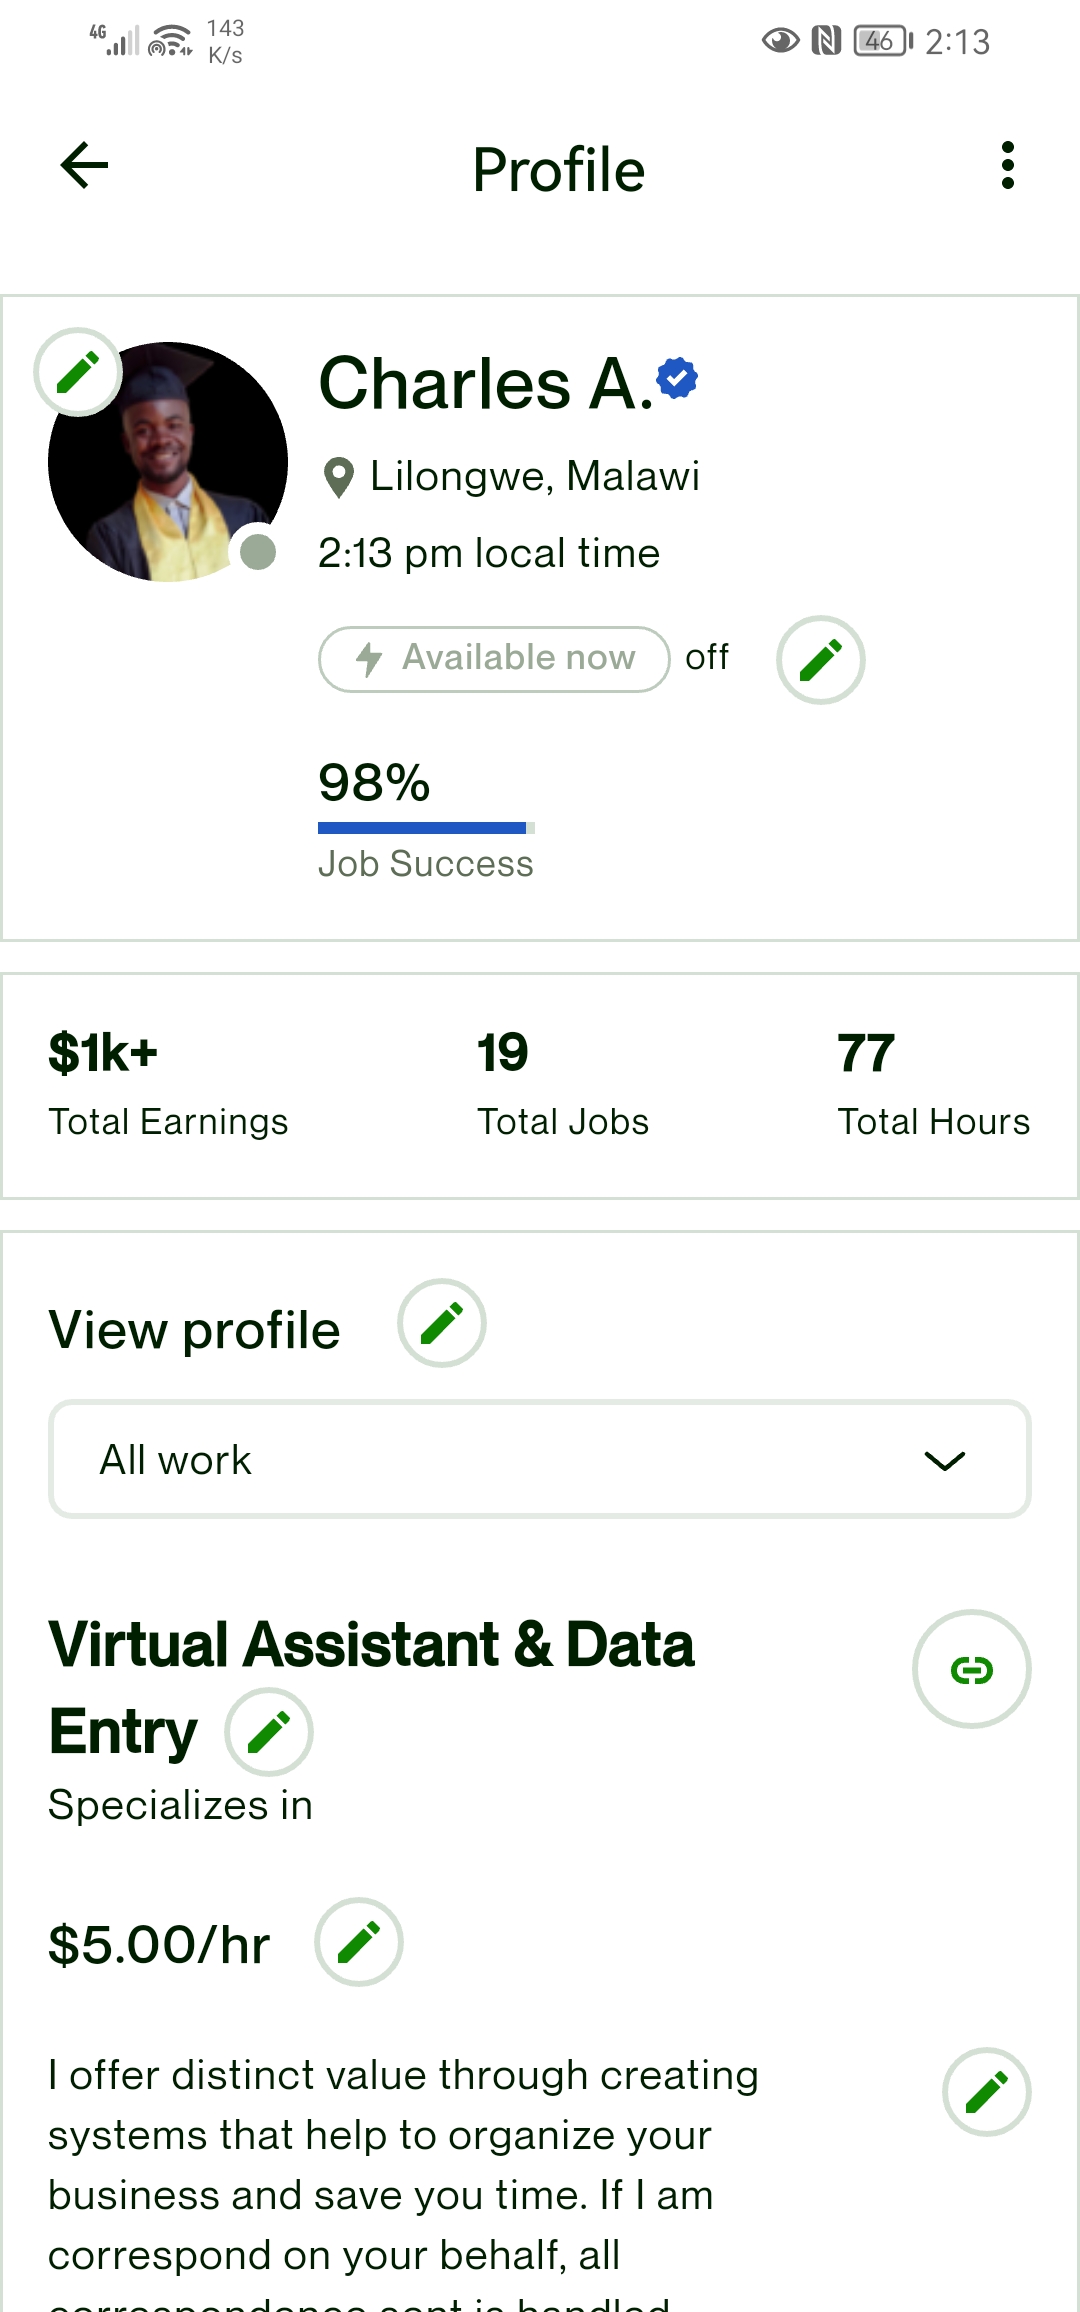 Top Reted On my Profile - Upwork Community